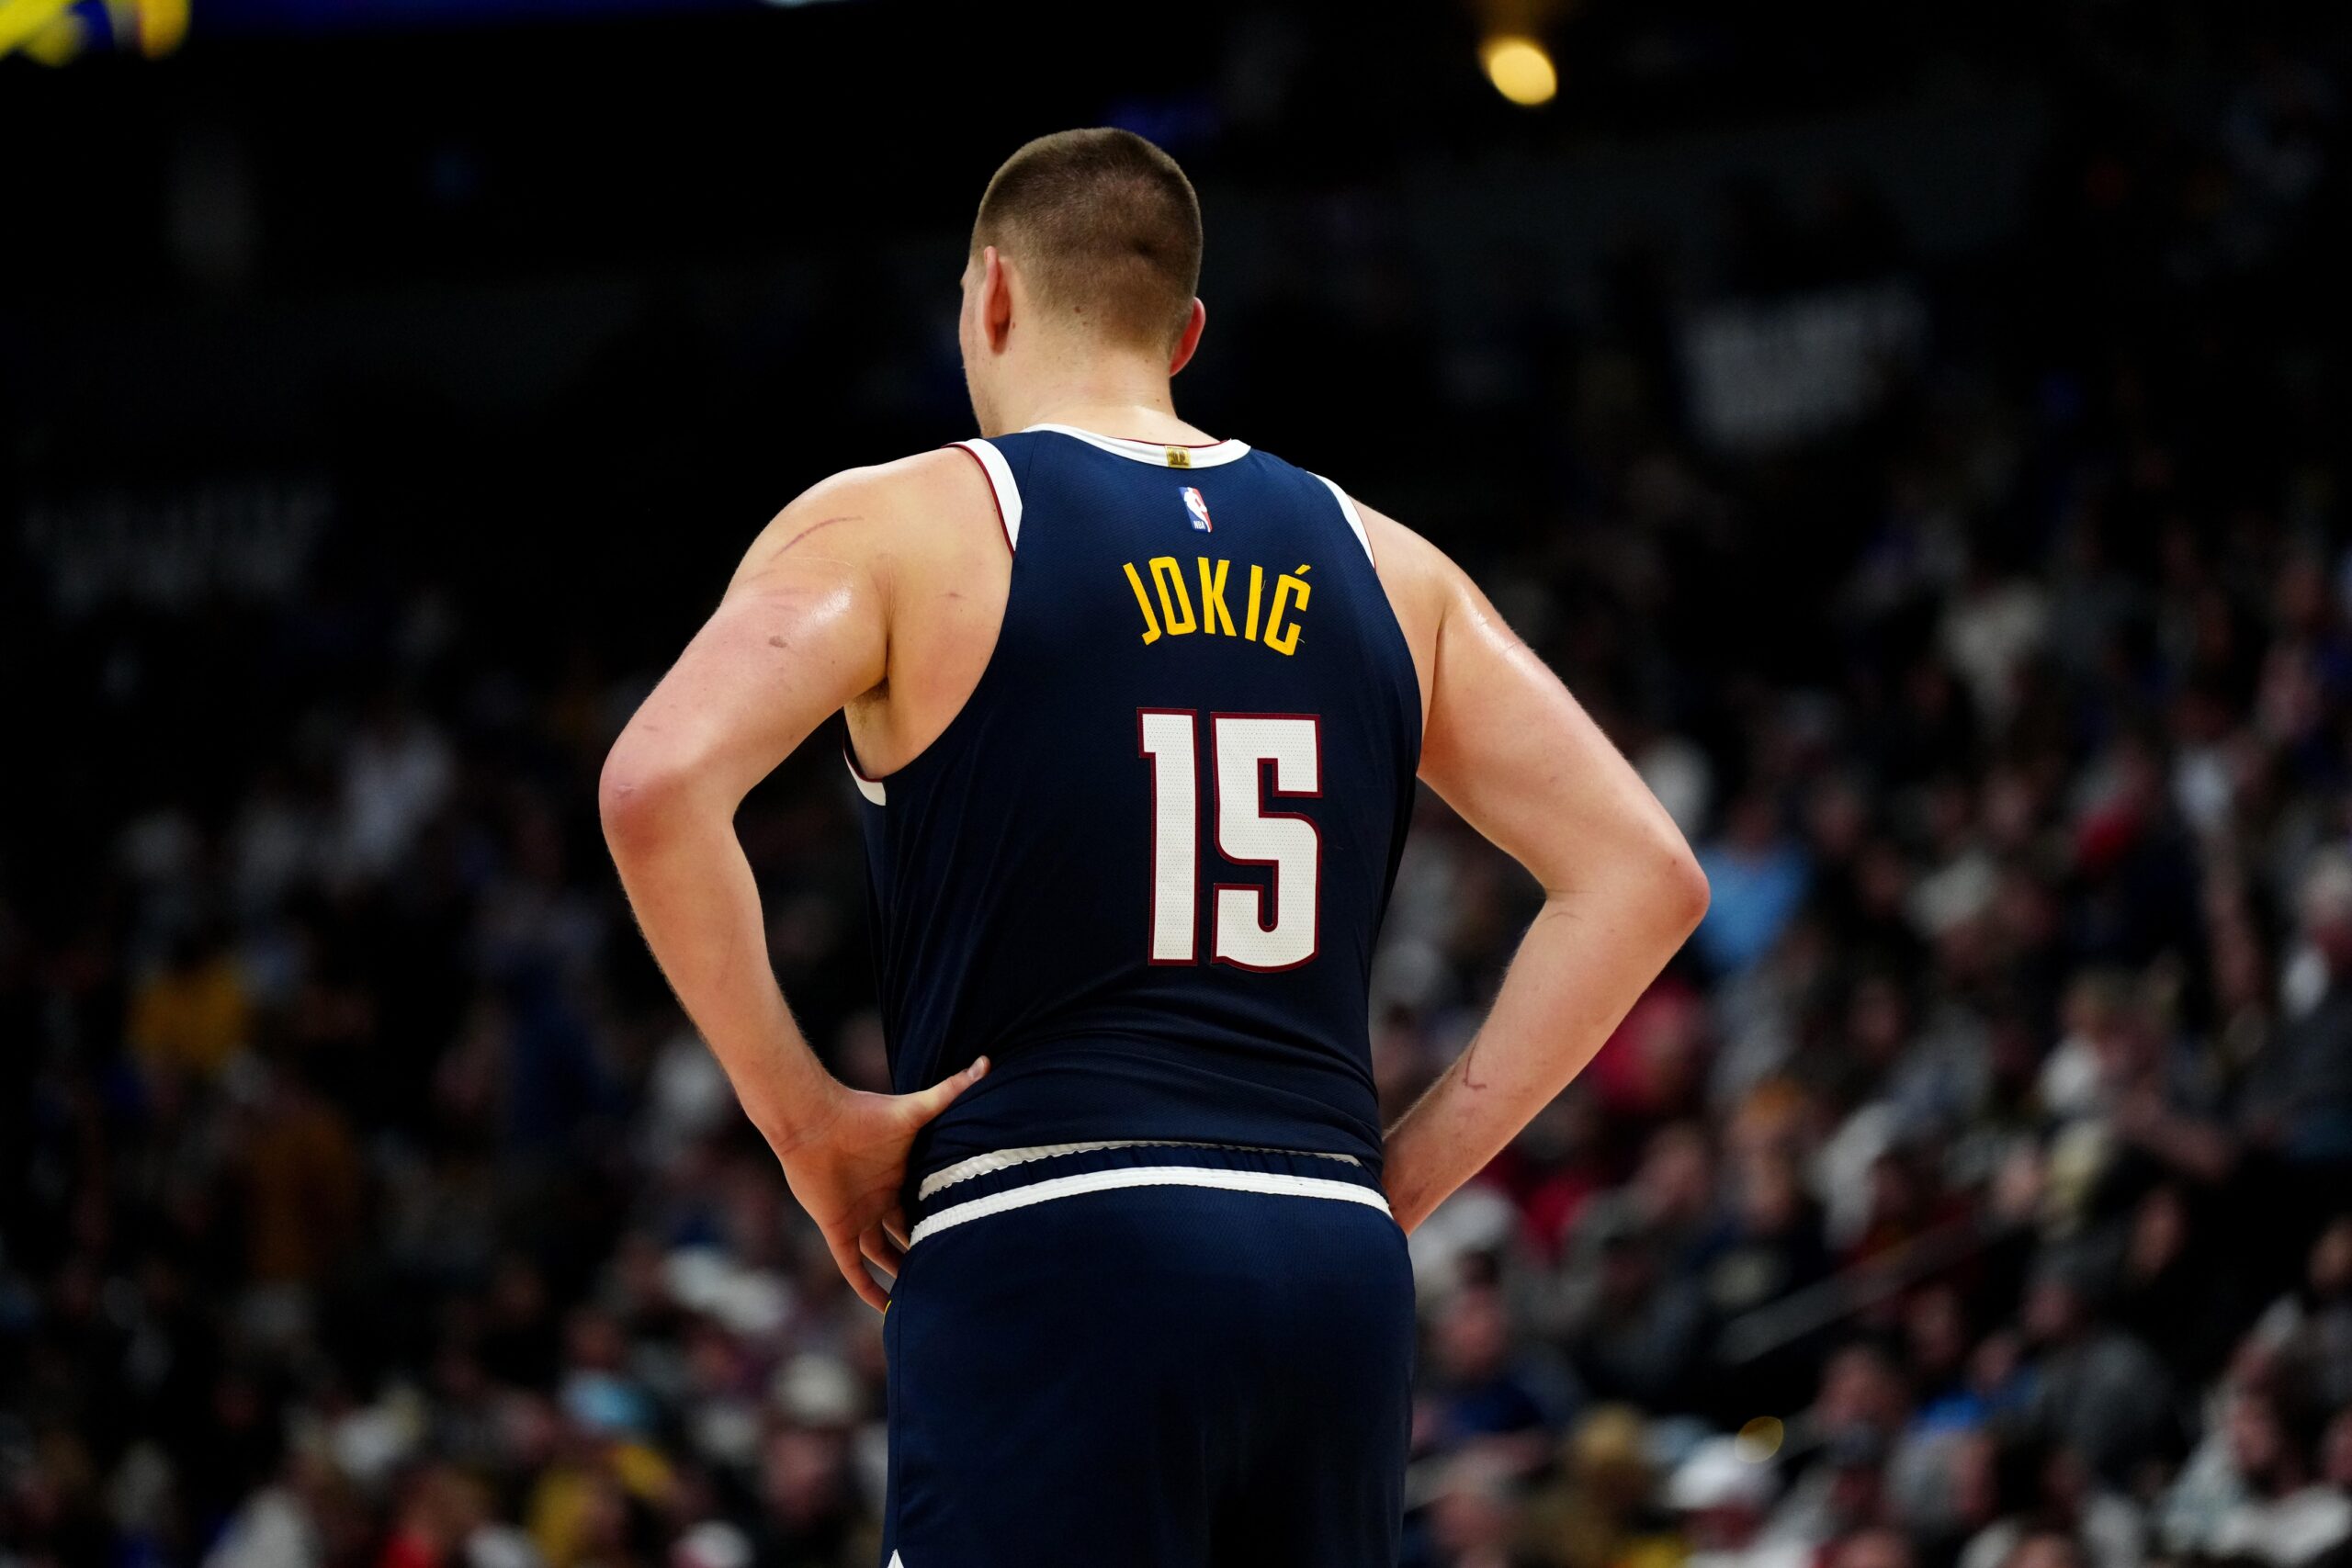 General view of Denver Nuggets center Nikola Jokic (15) during the game against the Washington Wizards at Ball Arena.